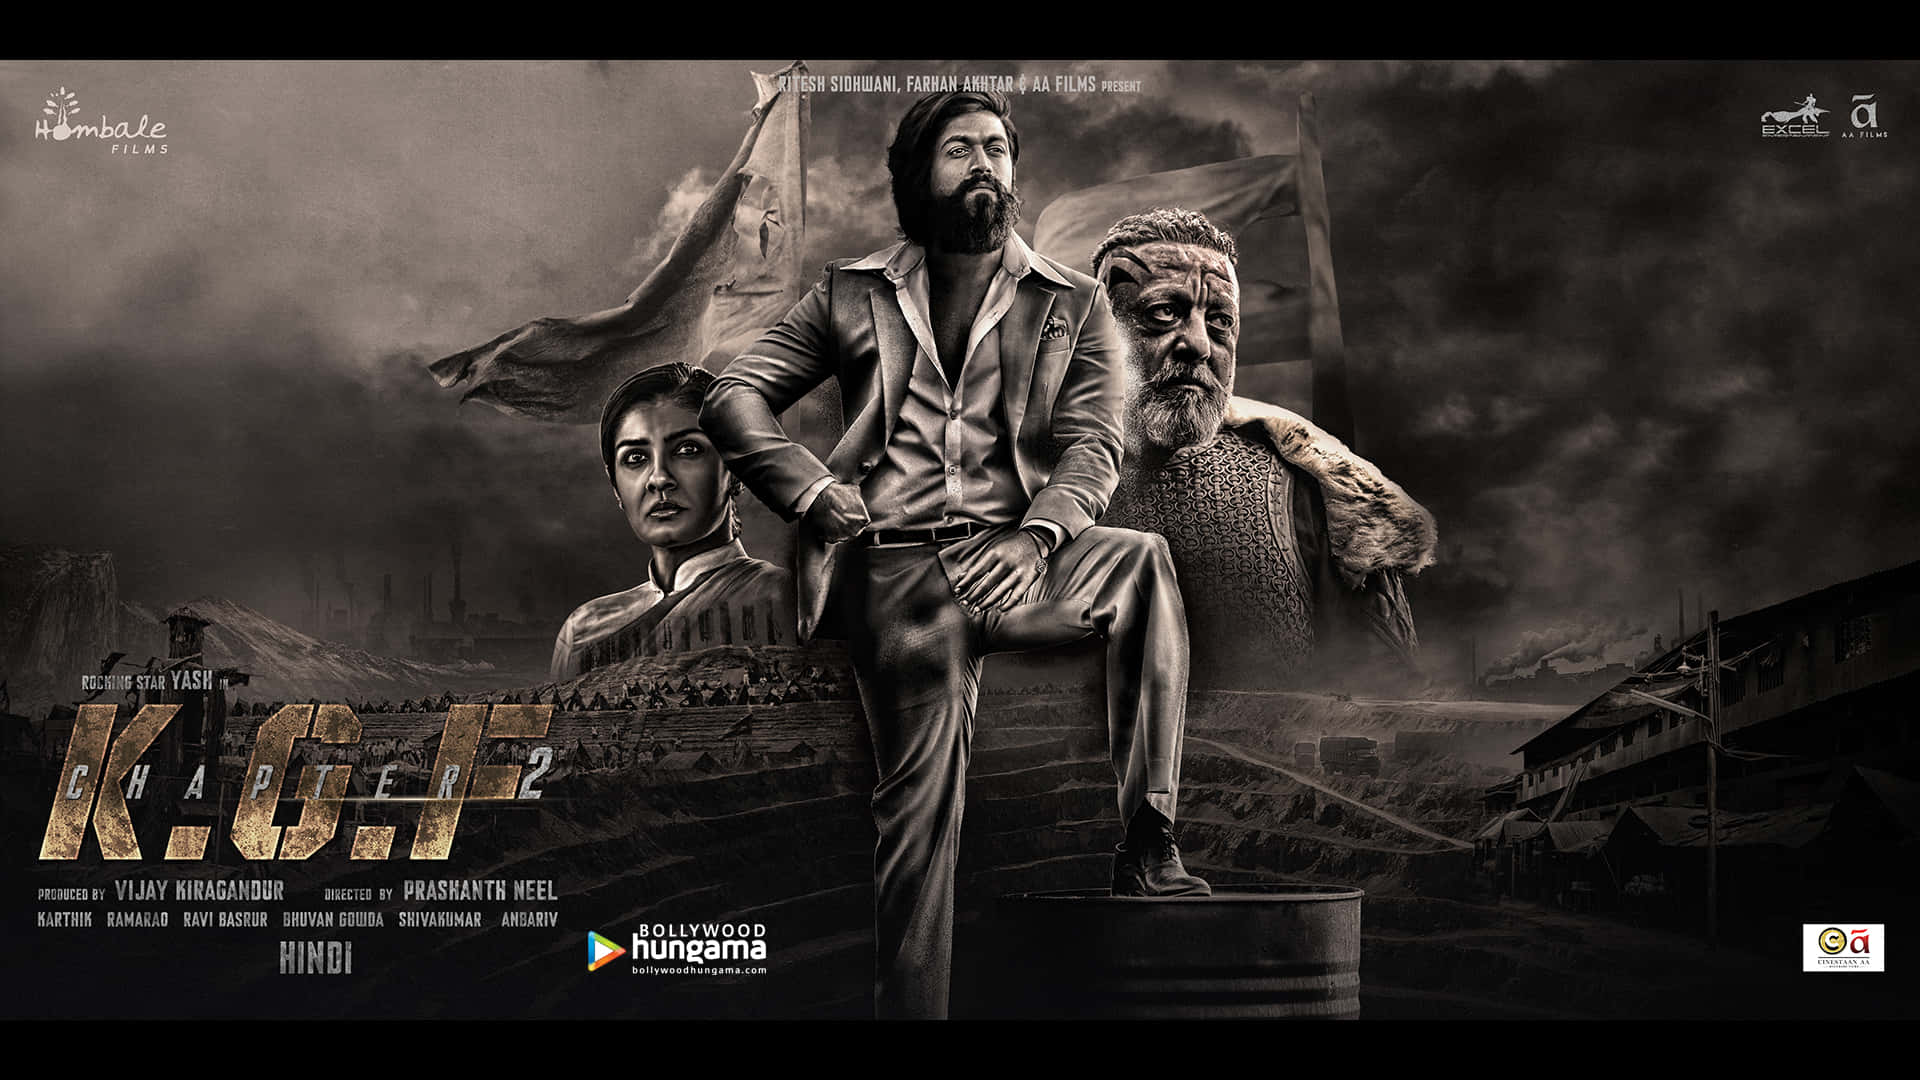 Yash returns in KGF Chapter 2 as a larger-than-life character